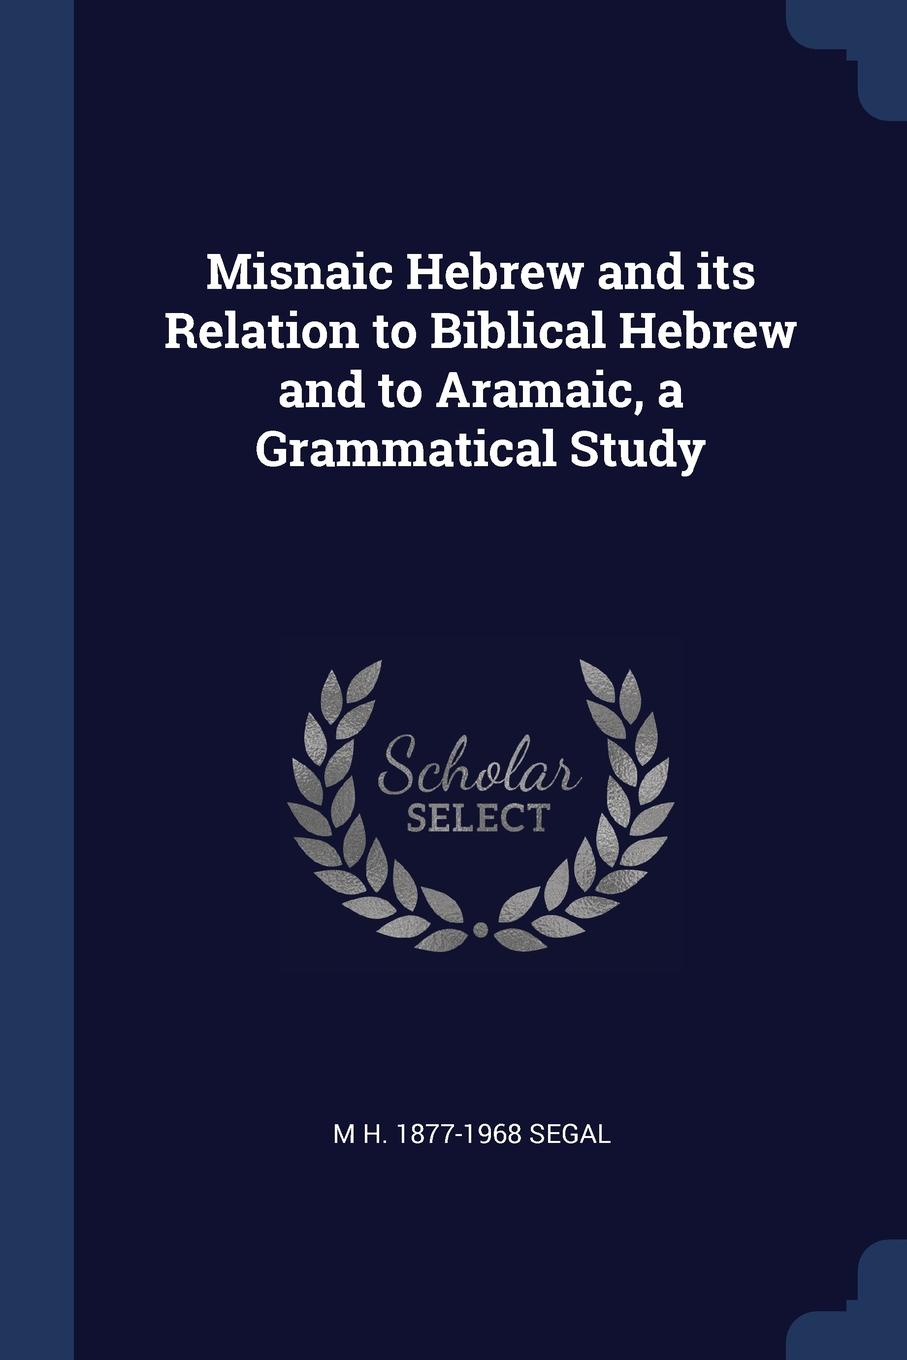 Misnaic Hebrew and its Relation to Biblical Hebrew and to Aramaic, a Grammatical Study